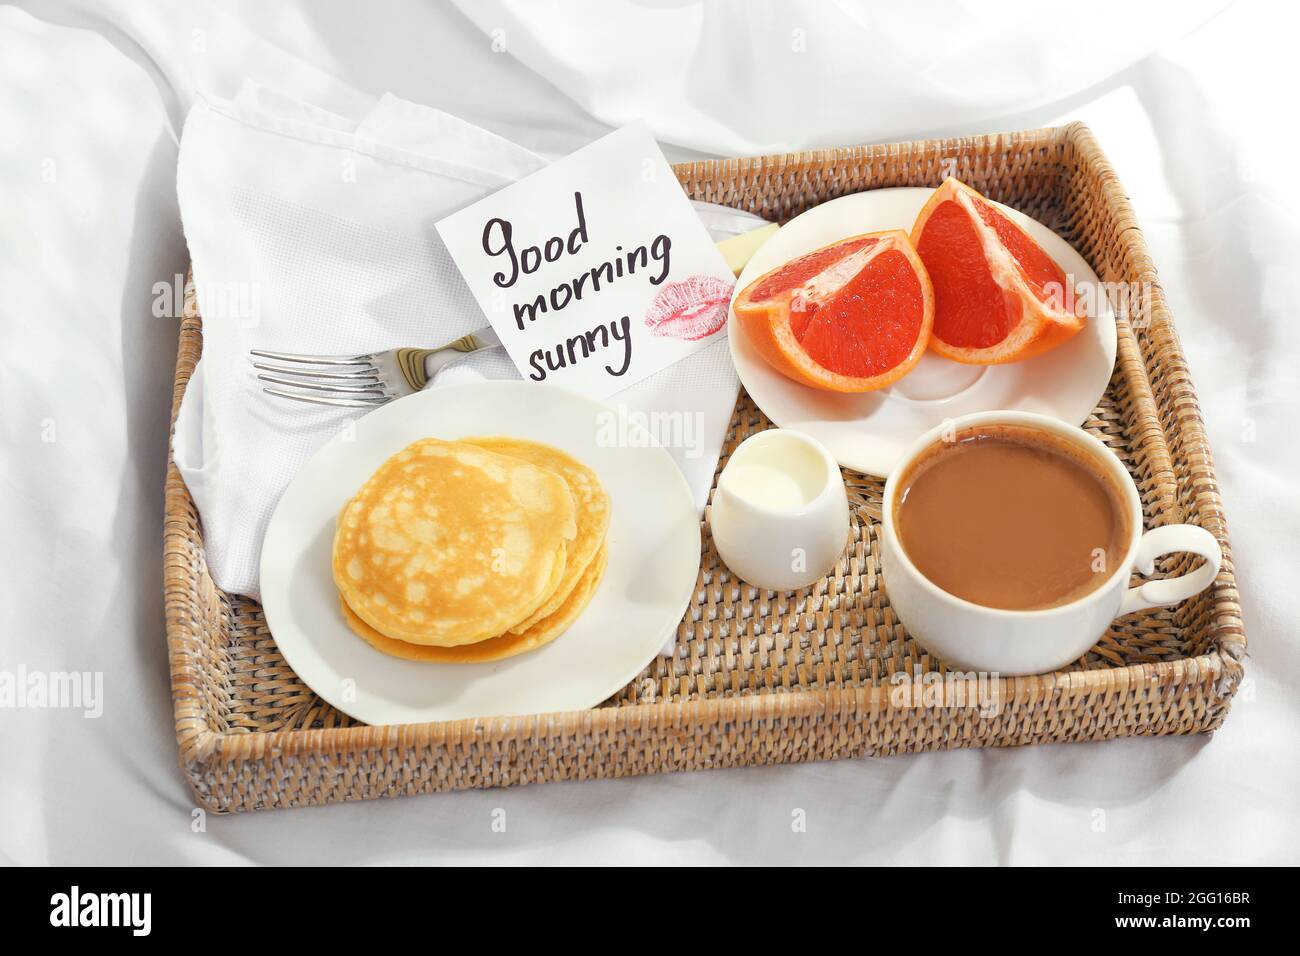 Healthy breakfast with wish of good morning Stock Photo - Alamy